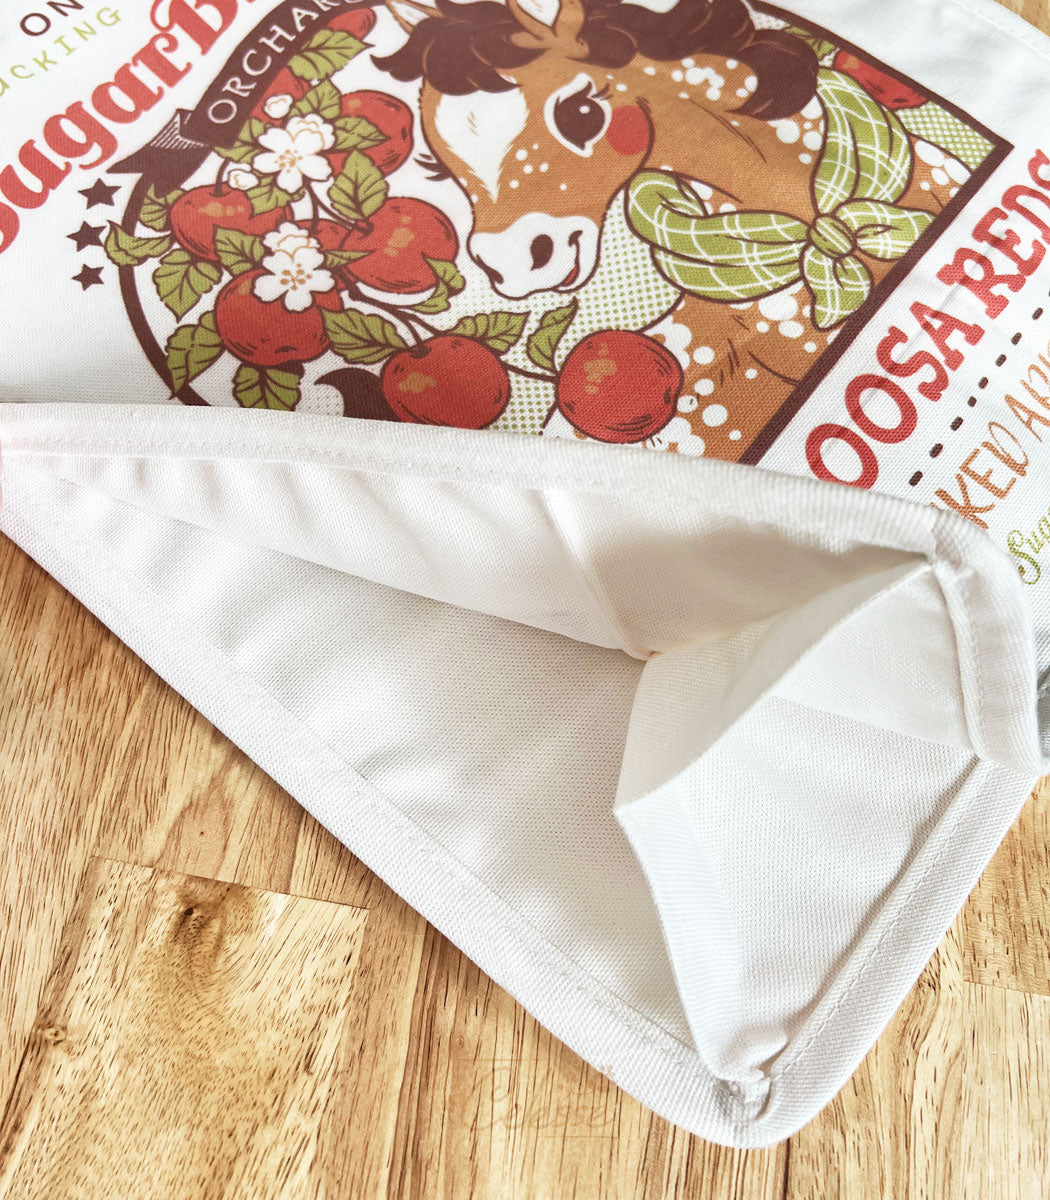 SugarBritches Orchard Appleloosa Reds Canvas Tote Bag